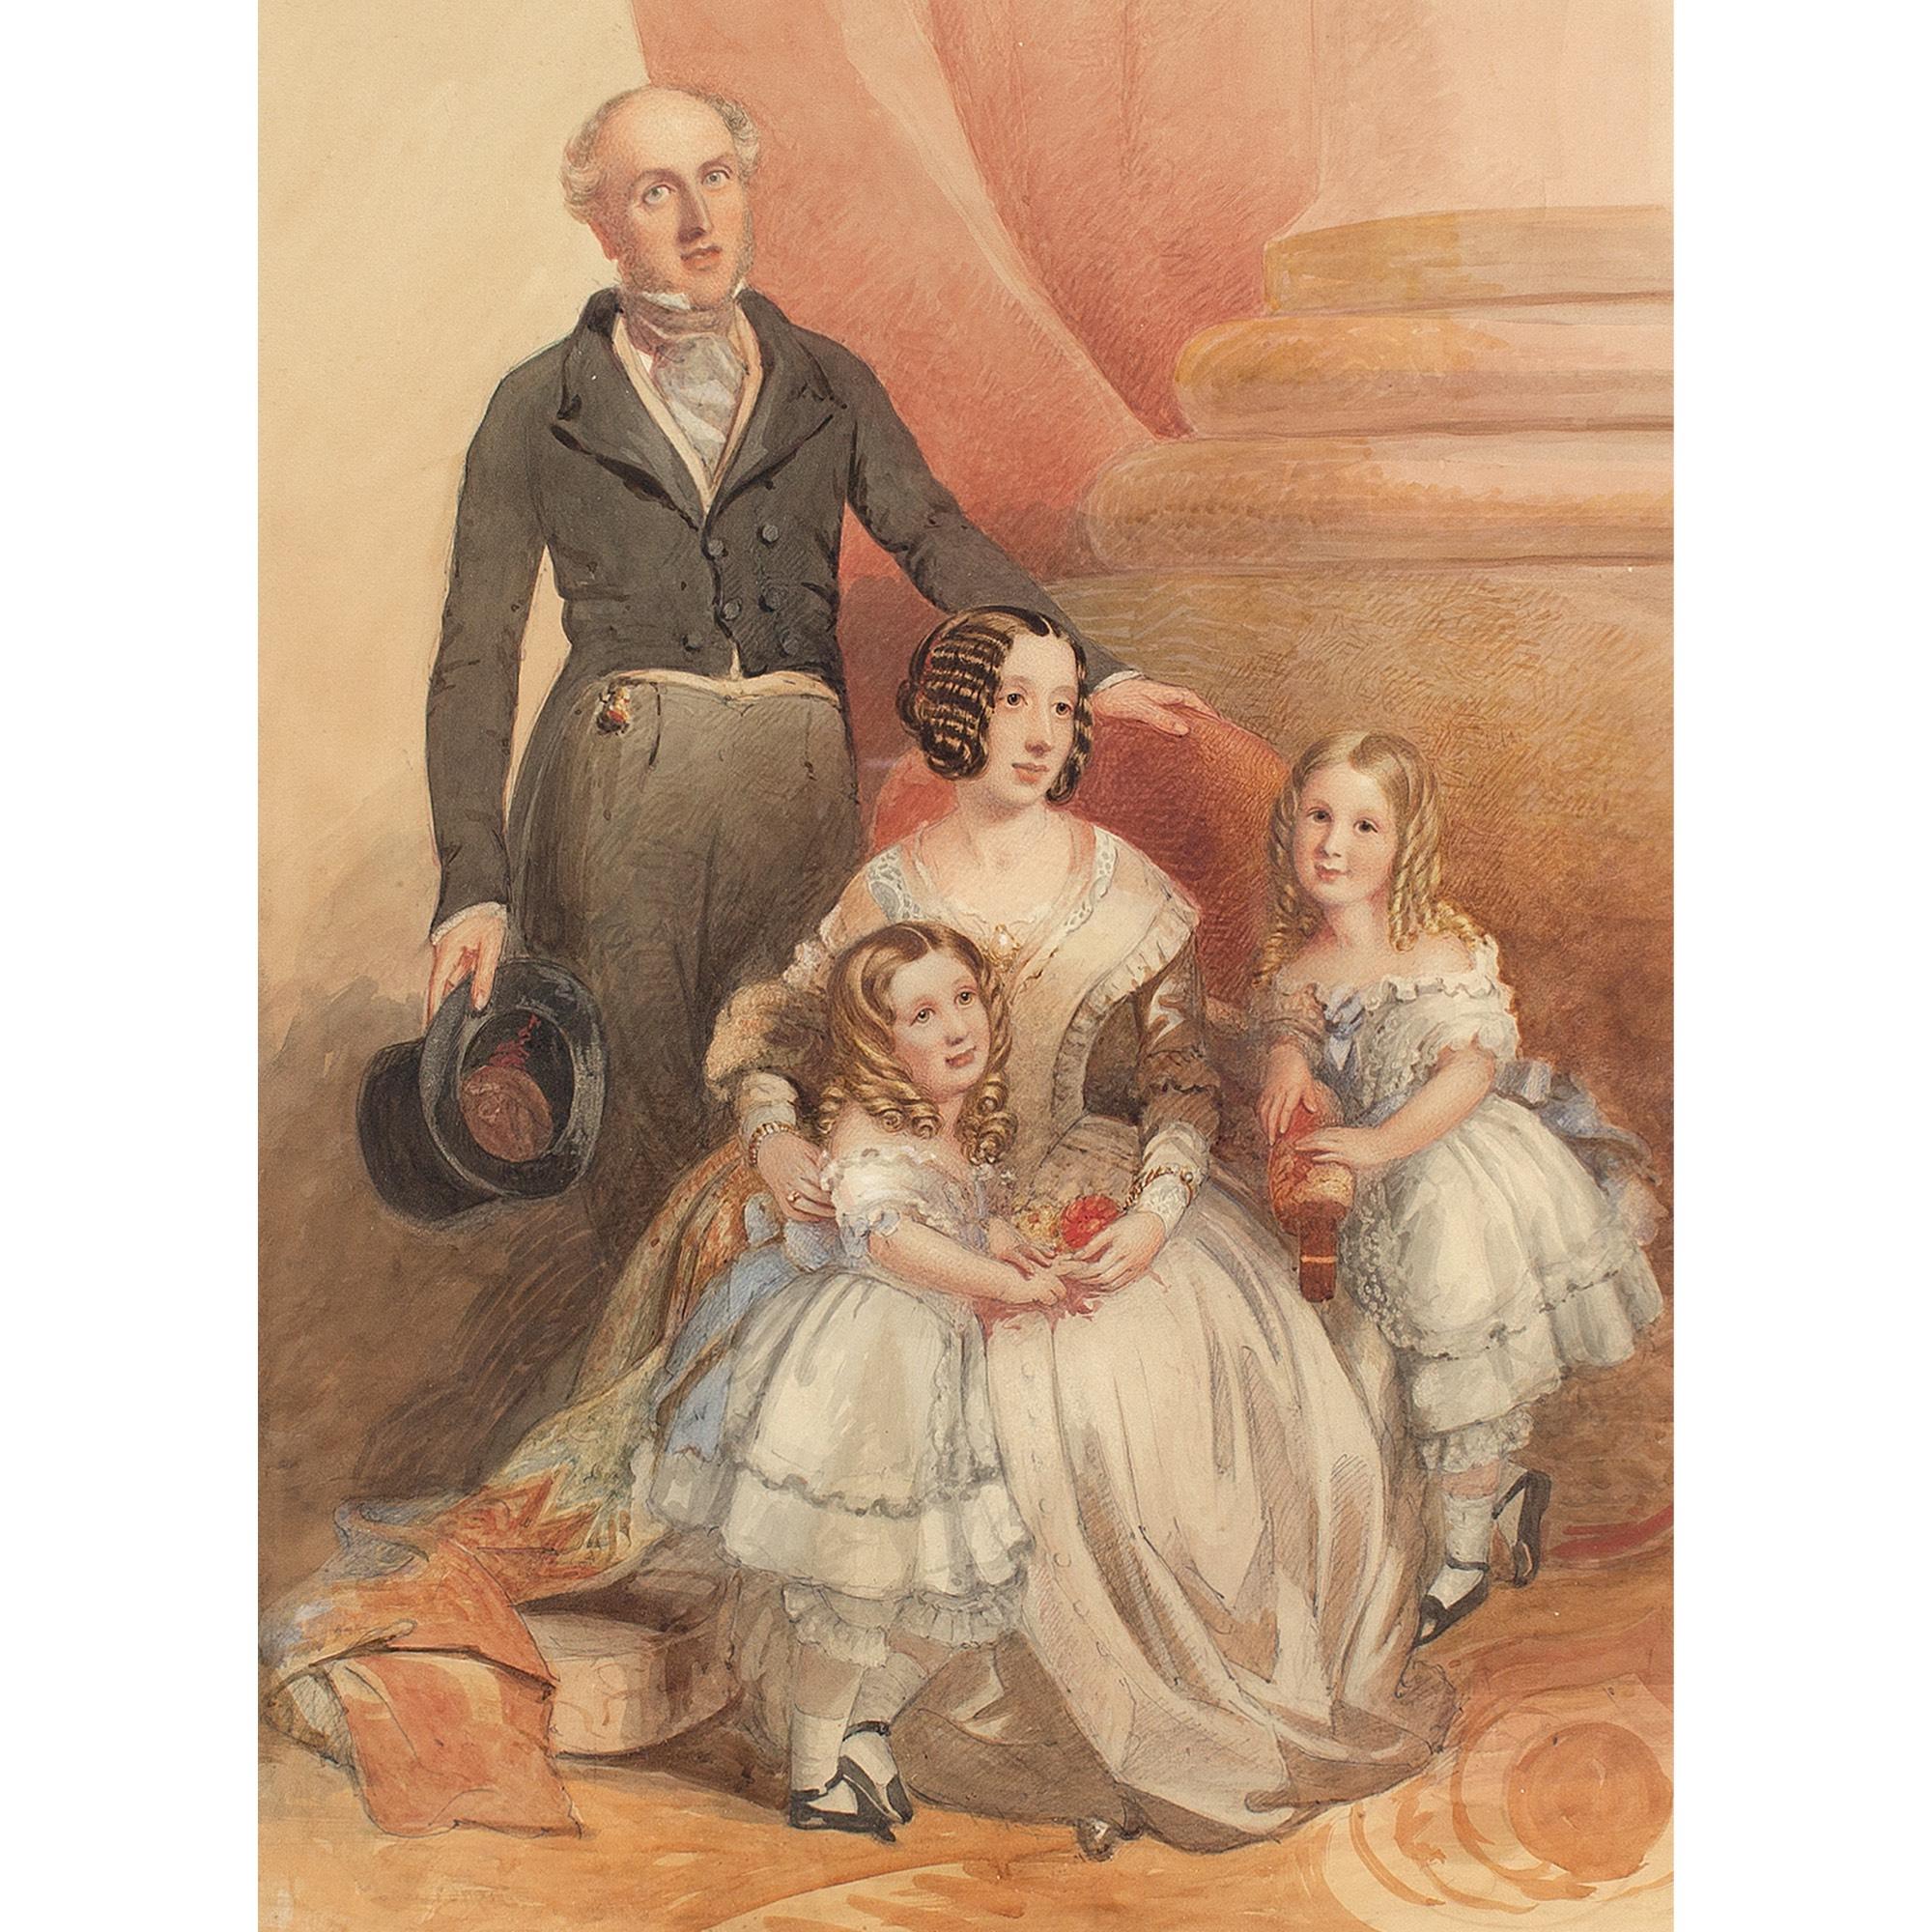 This beautiful mid-19th-century group portrait by British artist Frederick Cruickshank (1800-1868) depicts a father, mother and their two daughters within an interior setting. It’s a charming snapshot of a loving family.

The outfits date to around